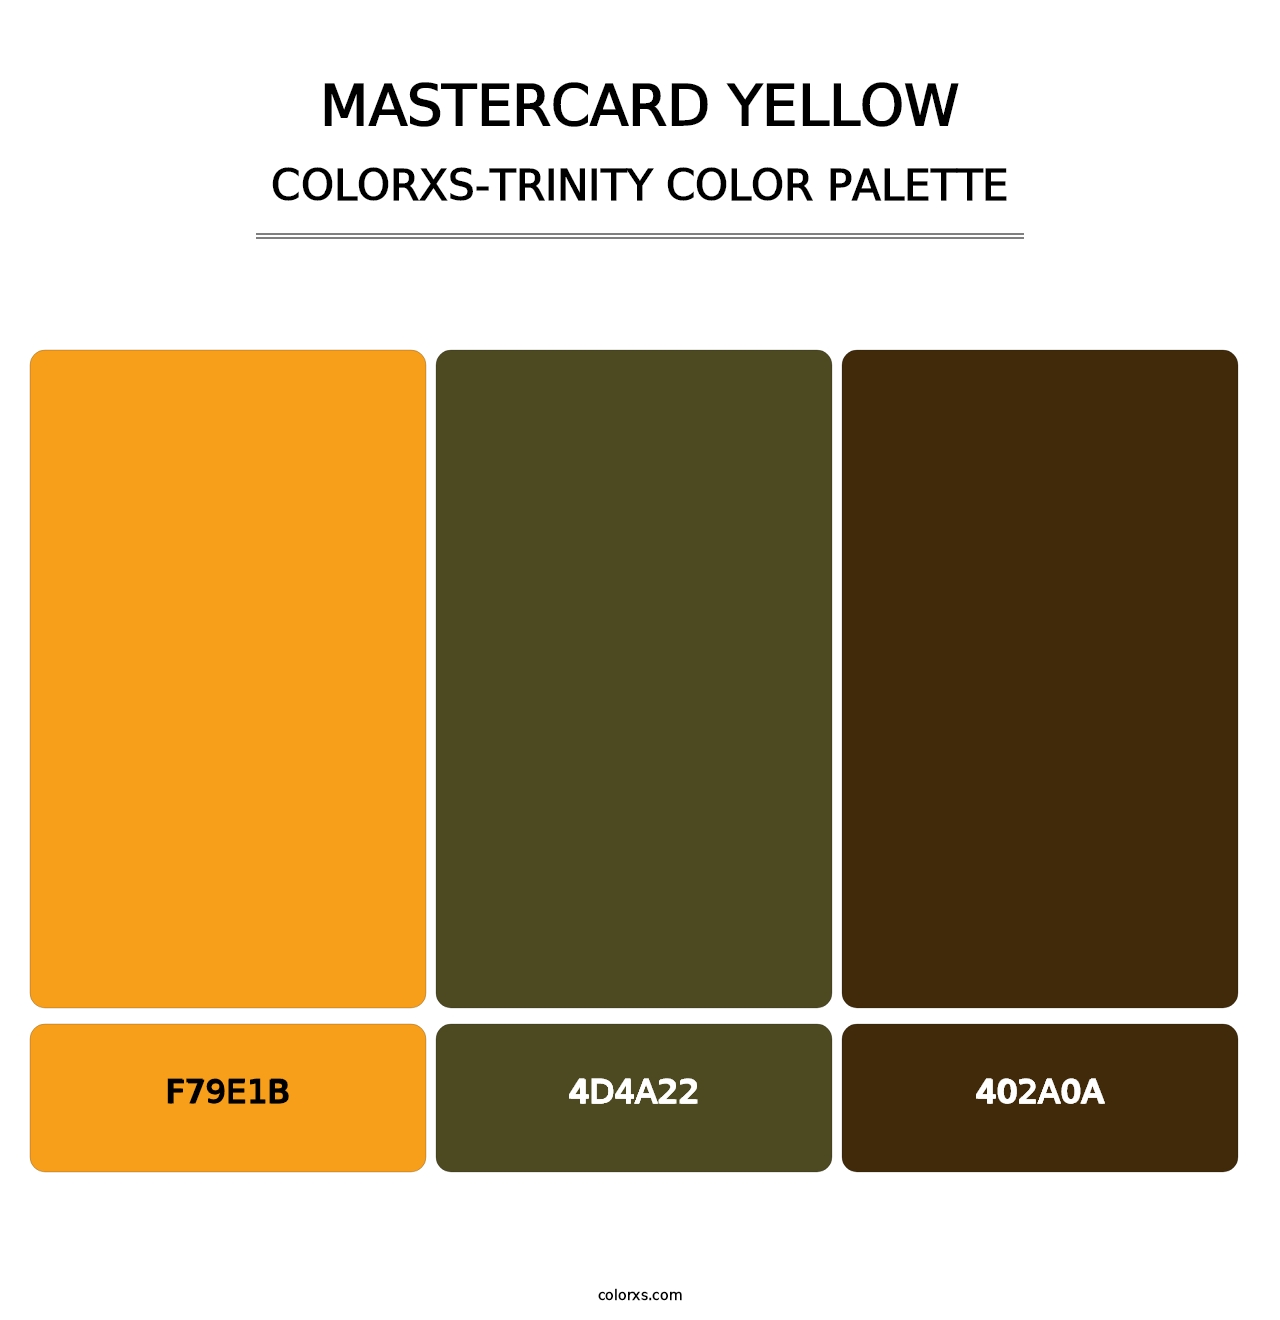 Mastercard Yellow - Colorxs Trinity Palette